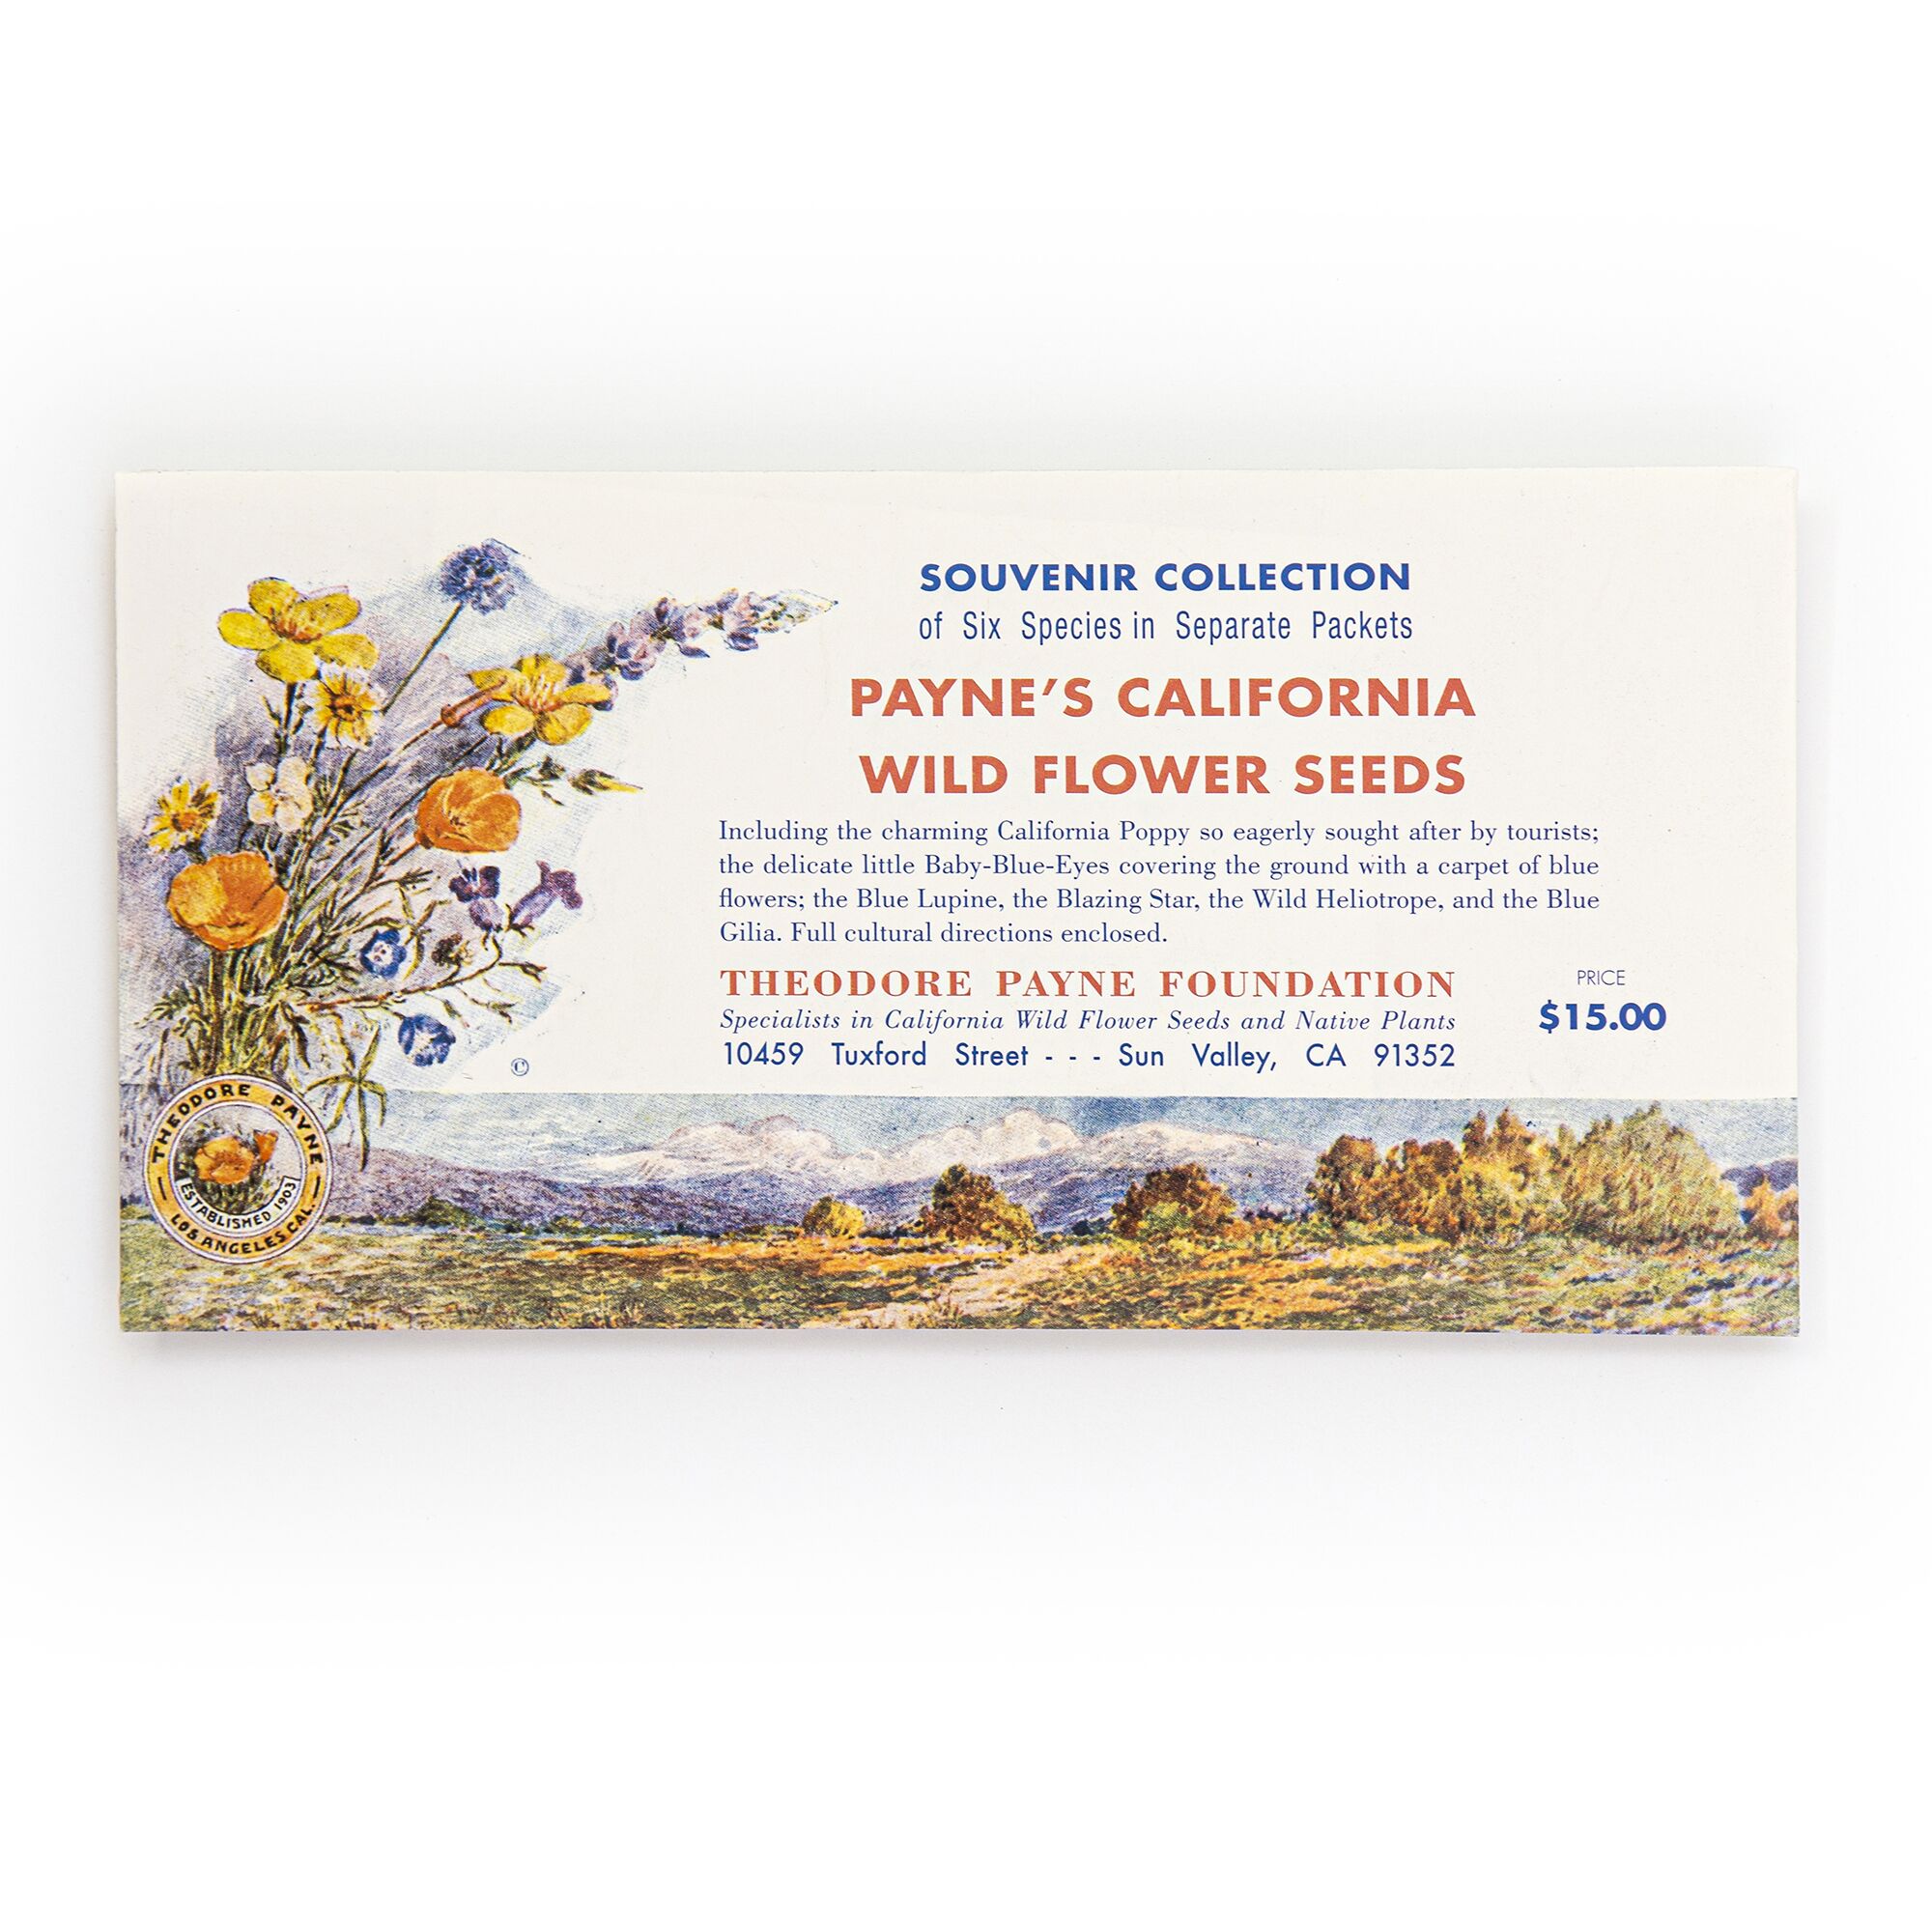 Souvenir Seed Collection from Theodore Payne Foundation Store.